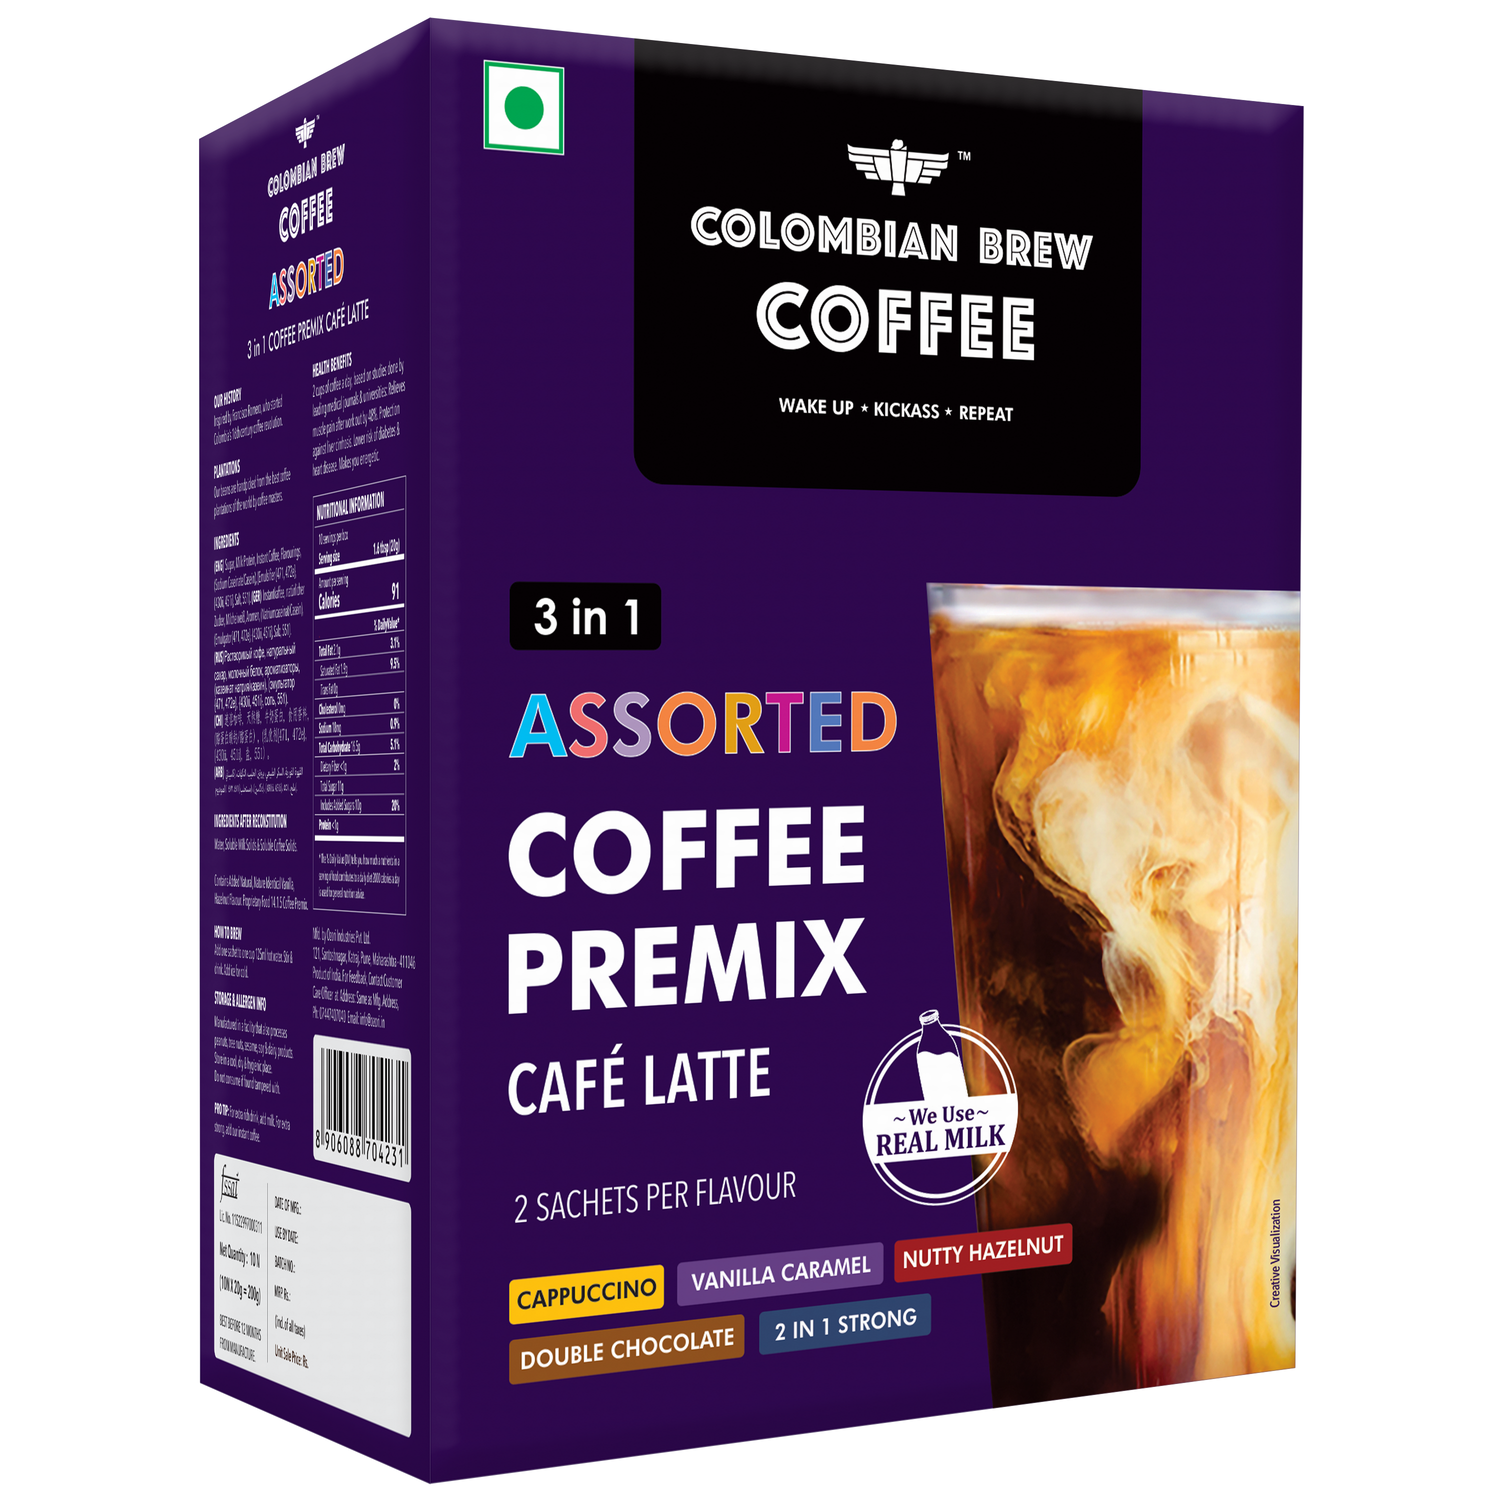 Colombian Brew 3 in 1 Assorted Instant Coffee Premix  Cappuccino, Nutty Hazelnut, Vanilla Caramel, Double Choco Mocha,2 in 1 Strong, 2 Sachet per flavour 